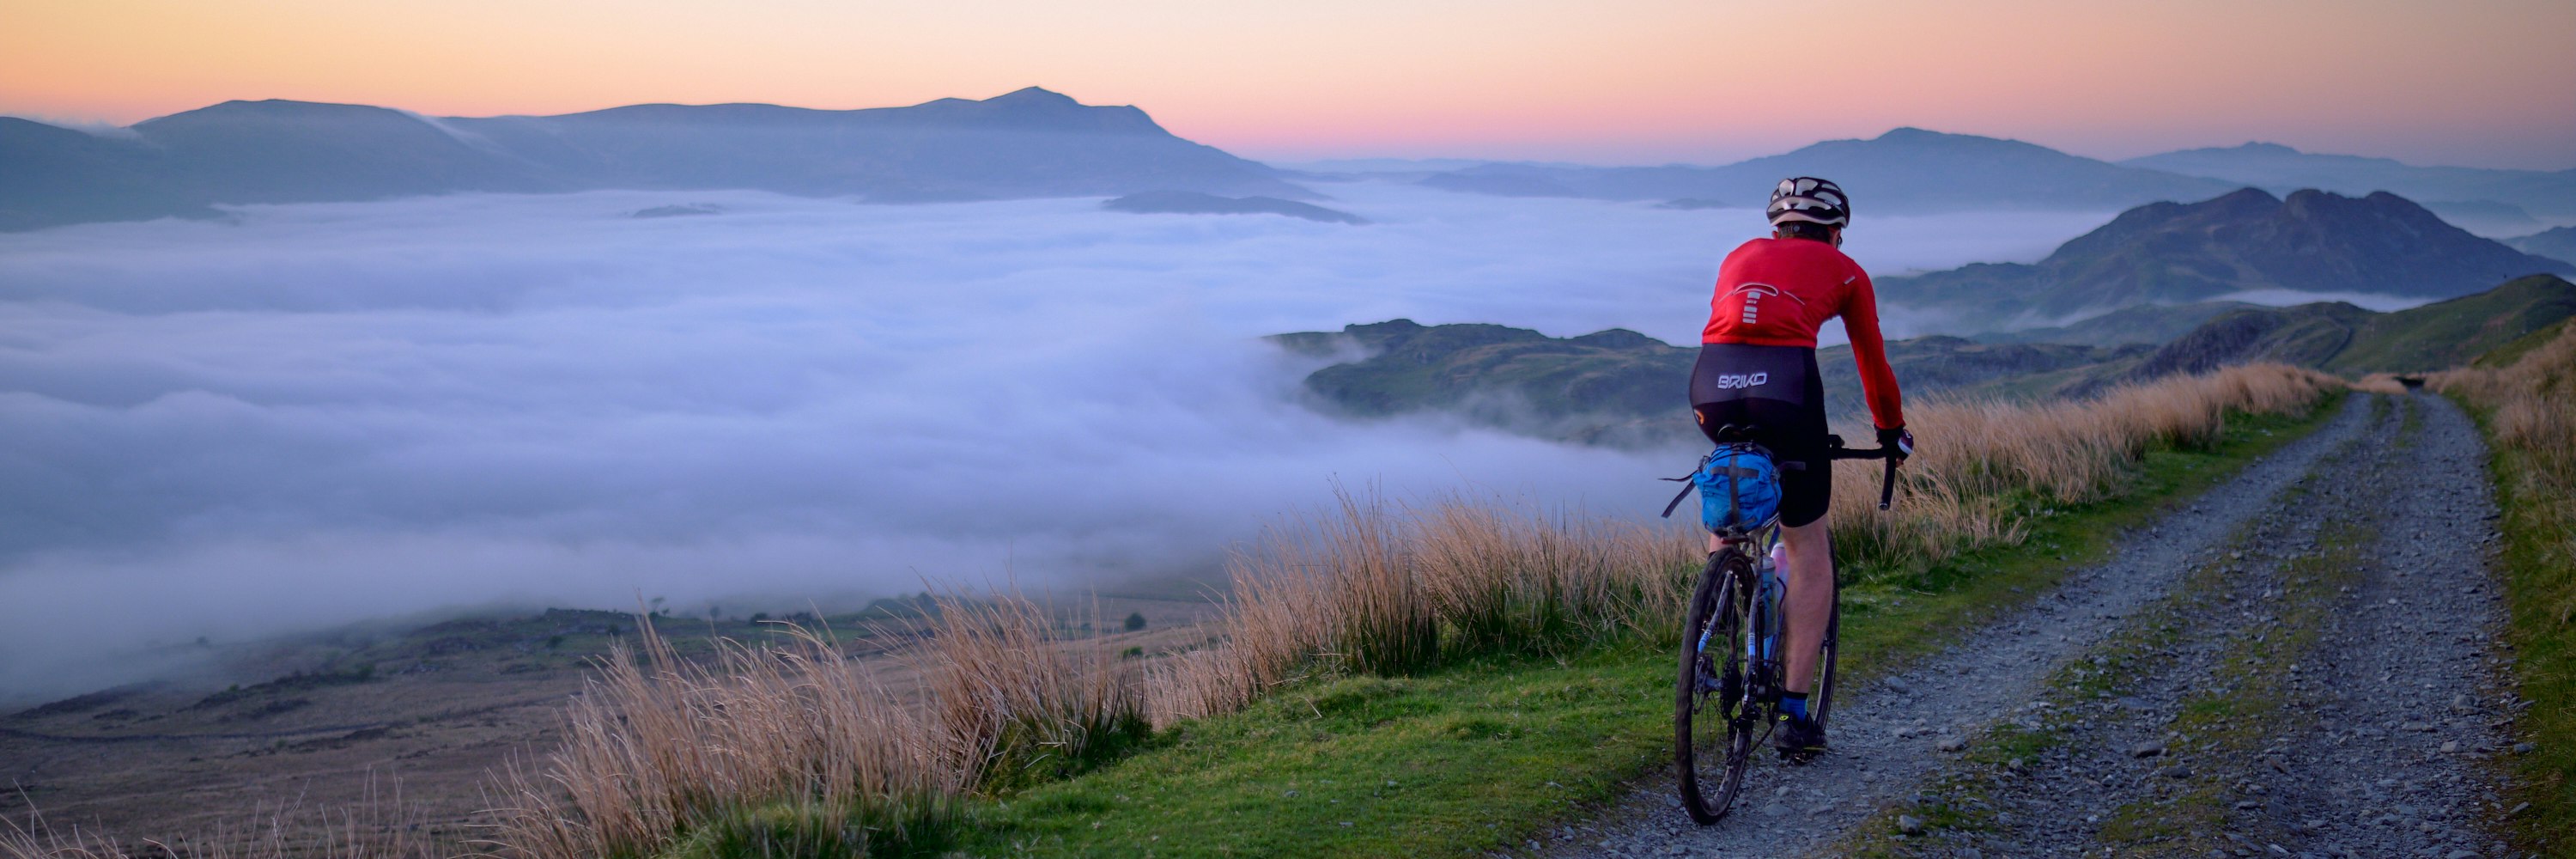 Cyclist travels through mist and mountain peaks in Dogellau, Wales